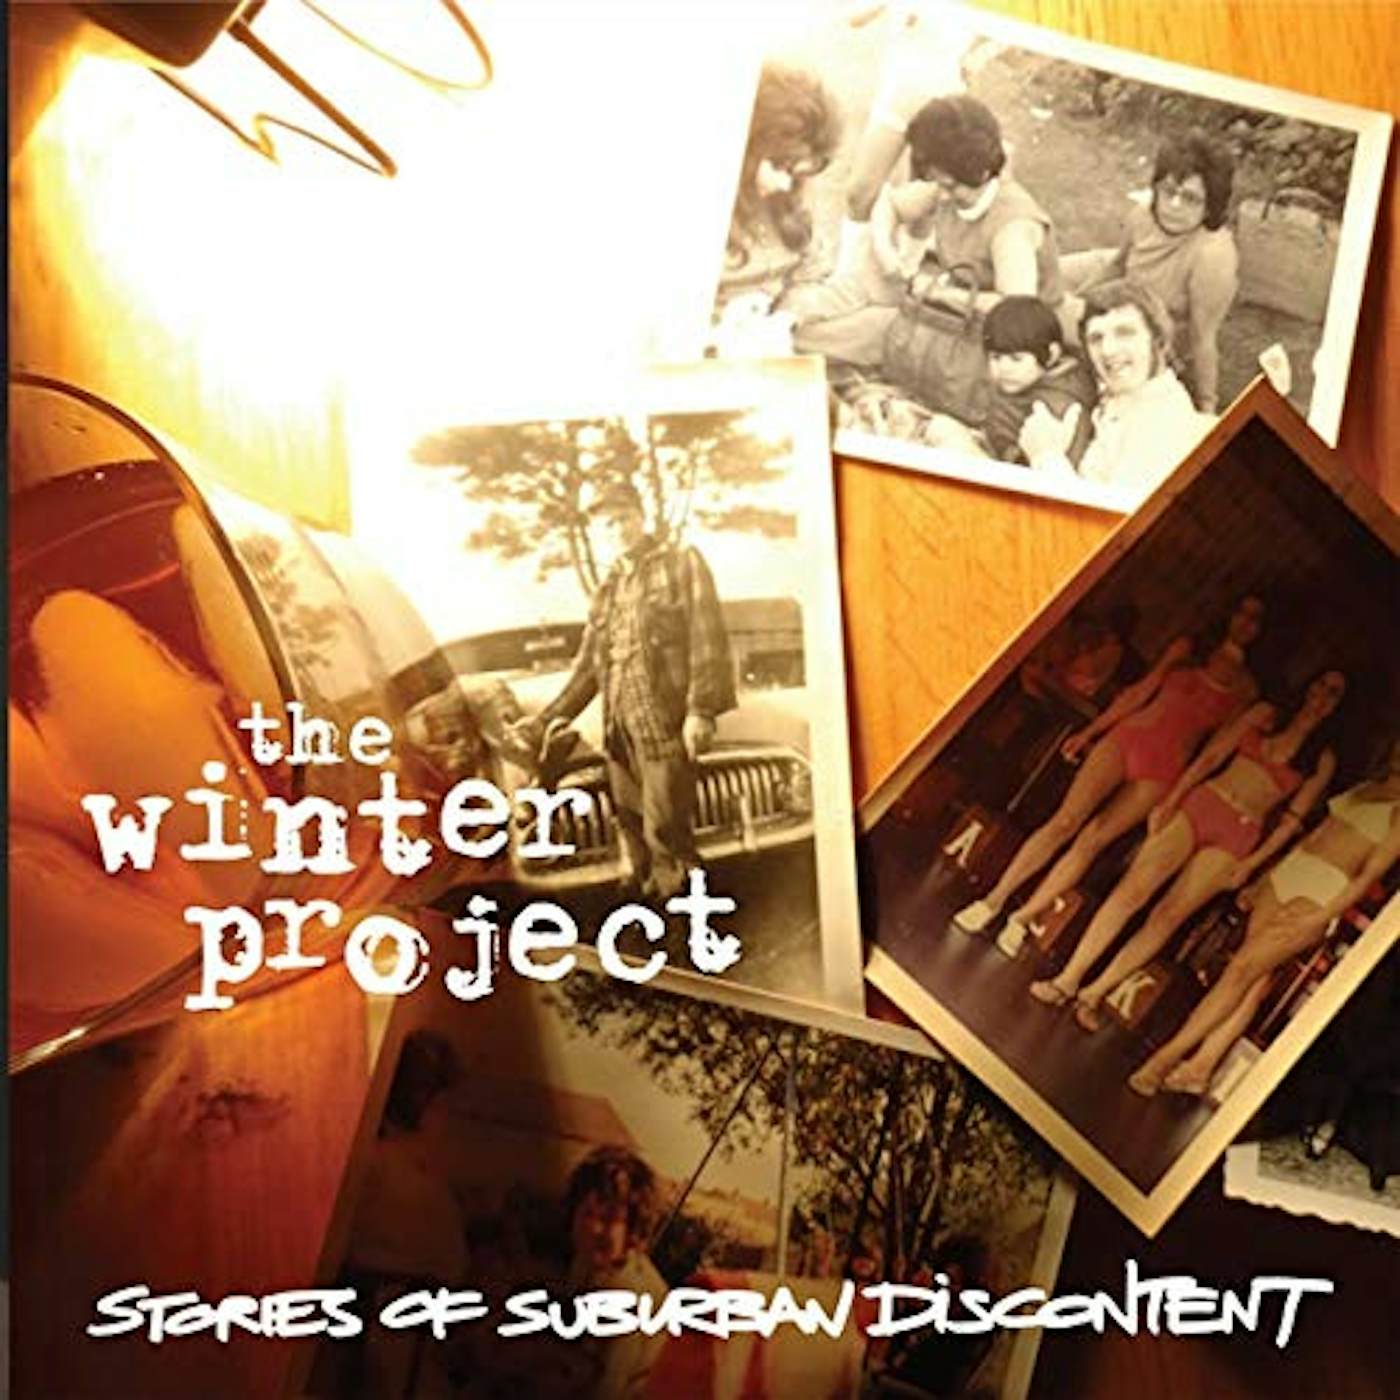 The Winter Project Stories of Suburban Discontent Vinyl Record